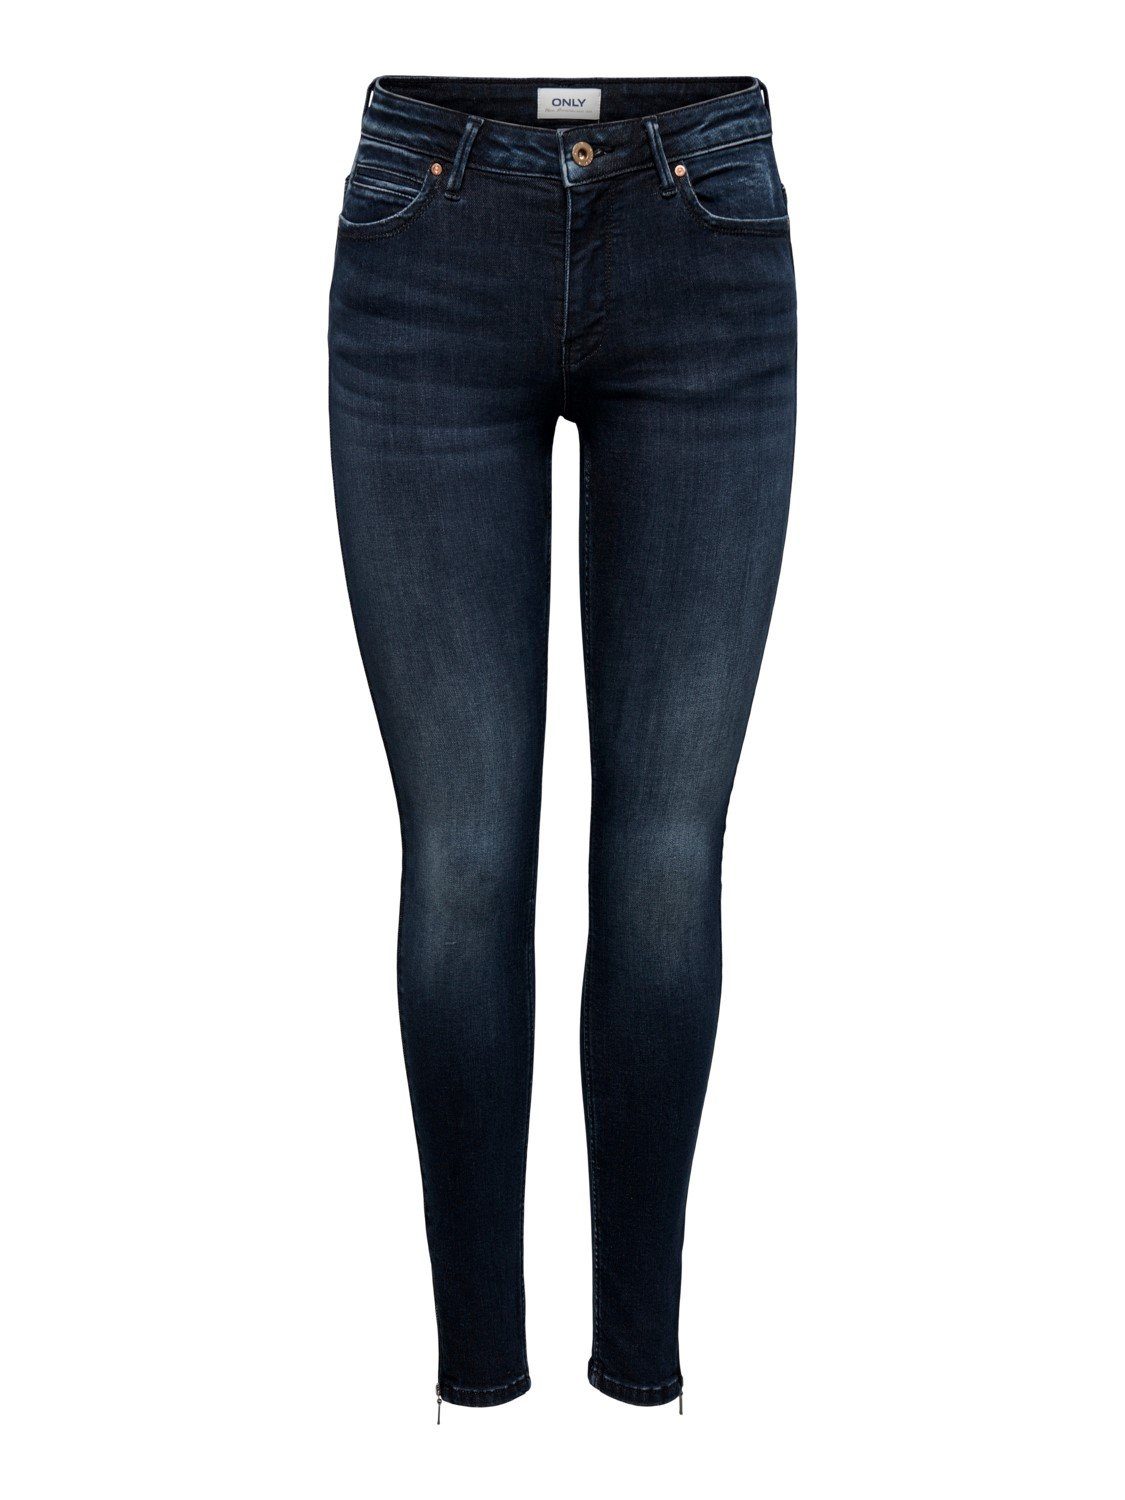 LIFE Stretch ANKLE Skinny-fit-Jeans mit ONLKENDELL ONLY REG TAI865 SK